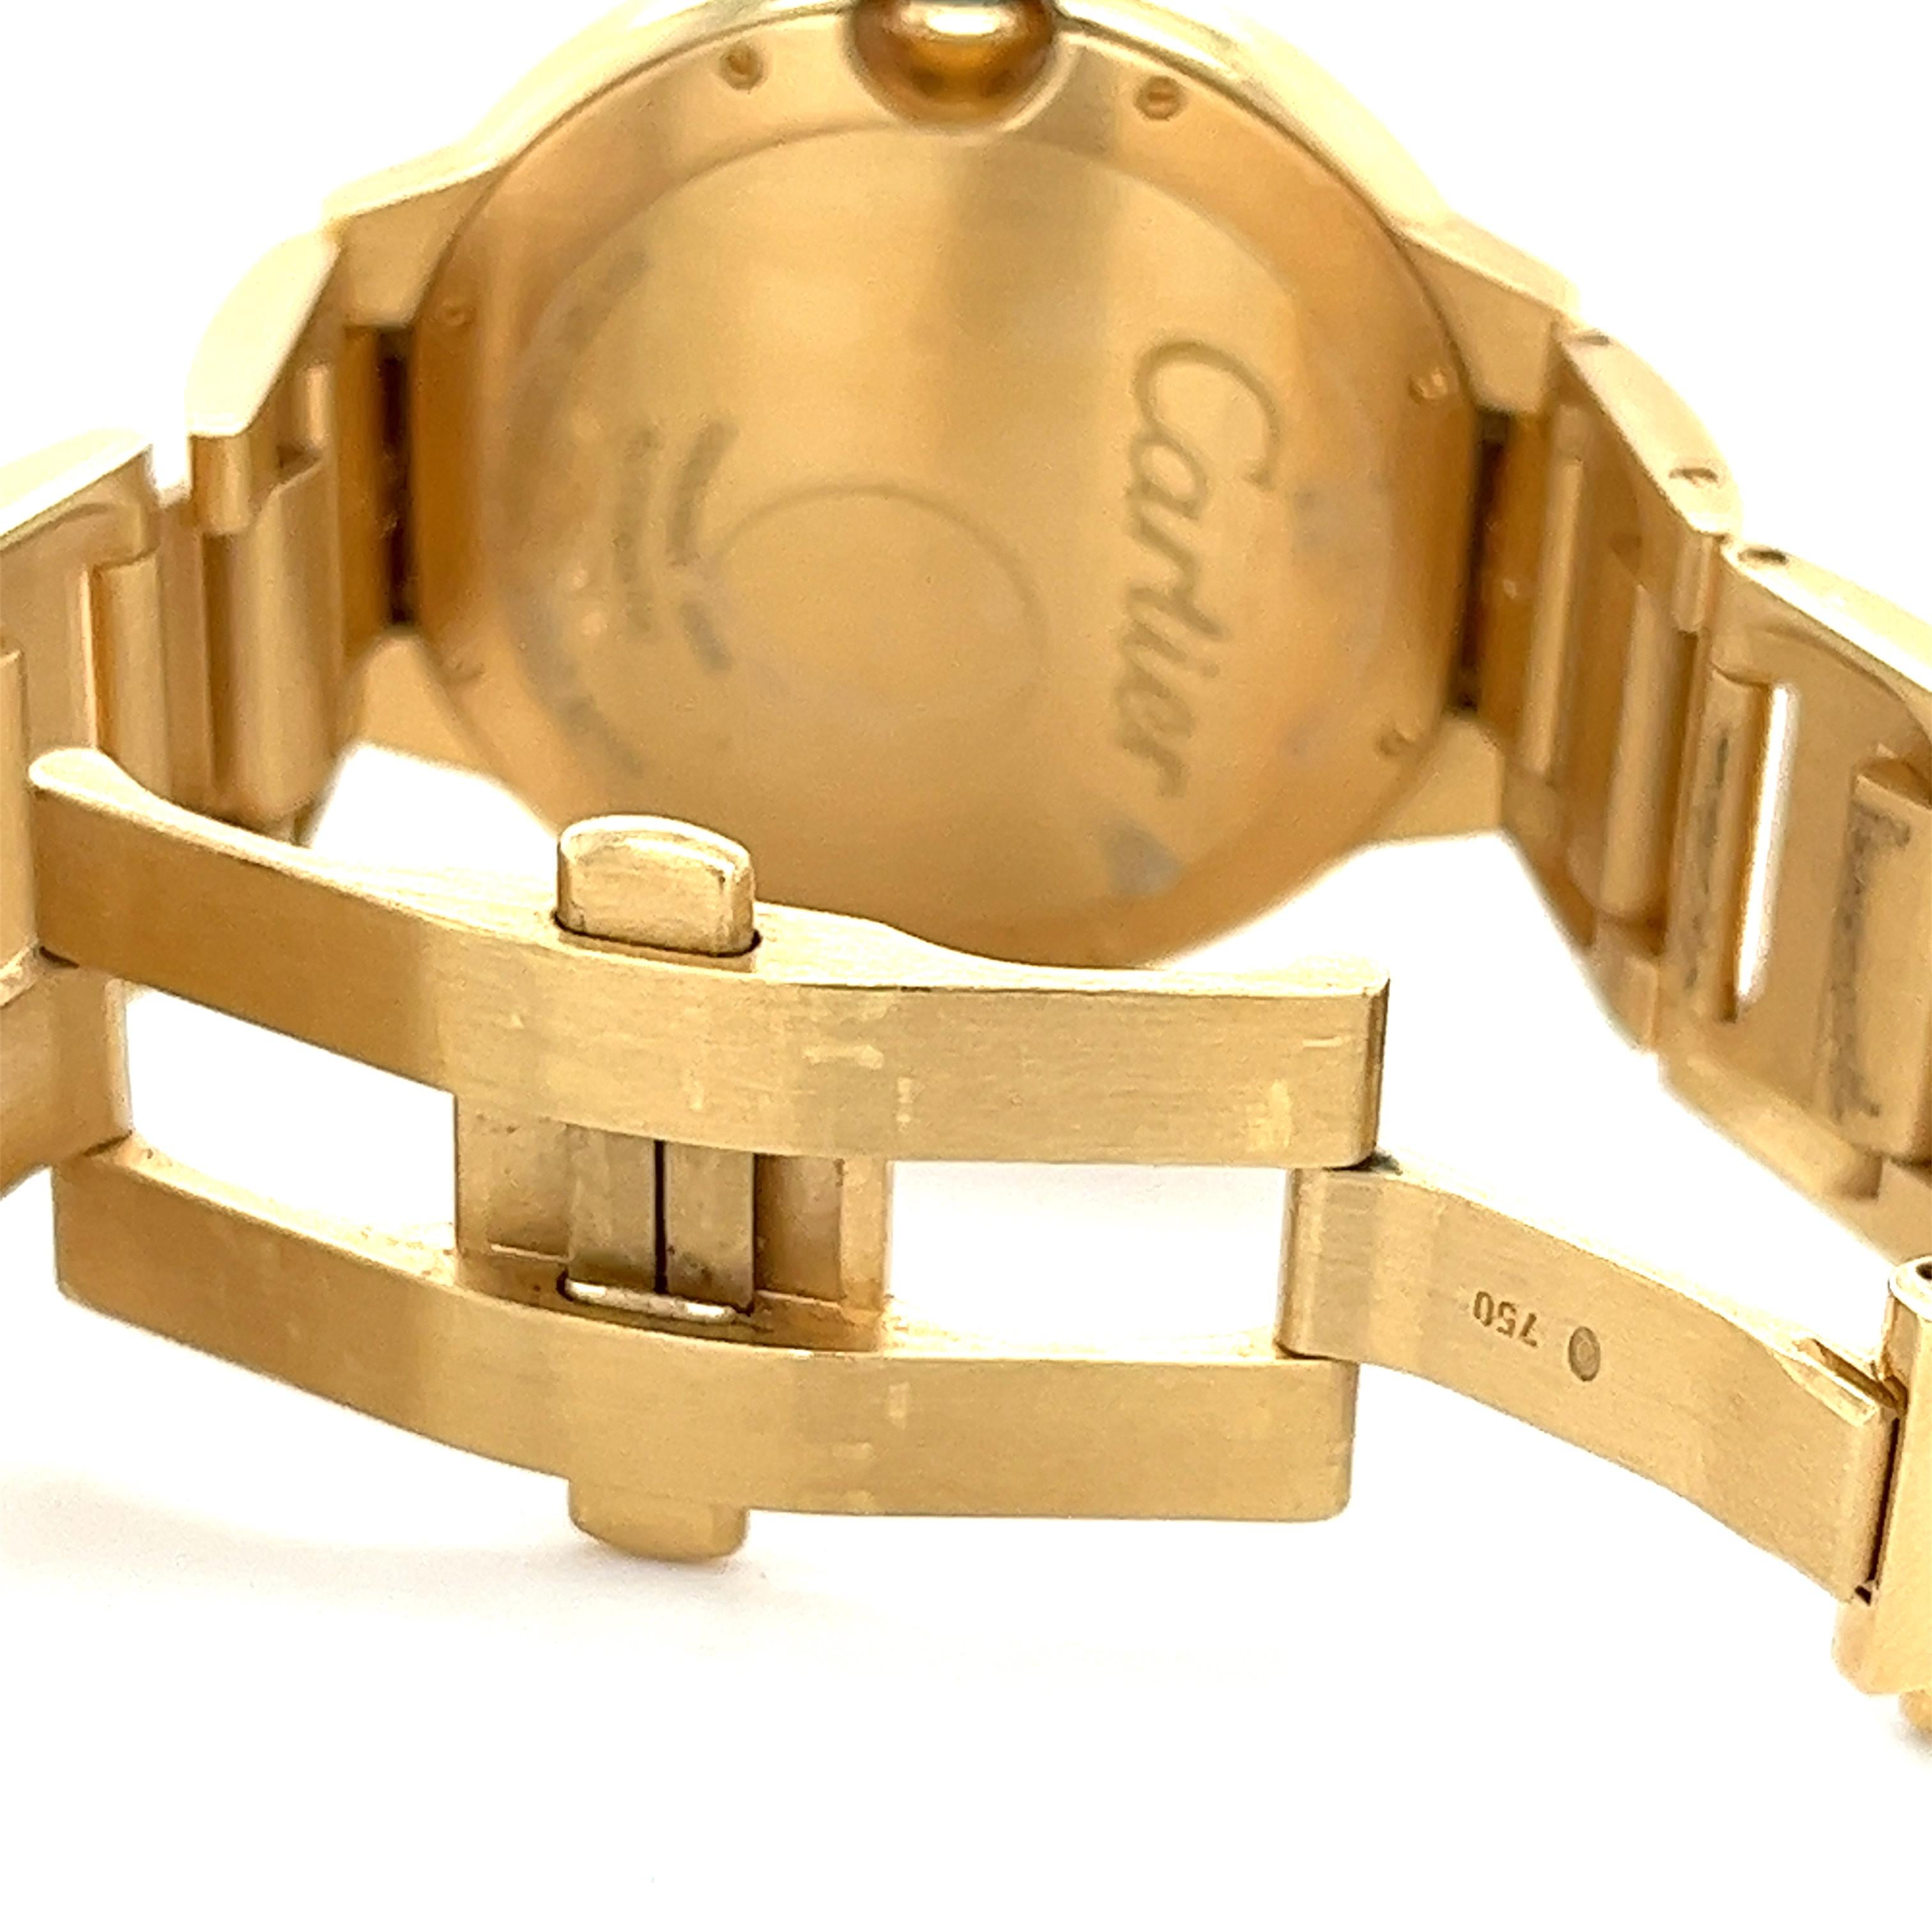 Cartier Ballon Bleu Jumbo Large Size Mens Watch in 18k Gold with Box/Papers For Sale 3